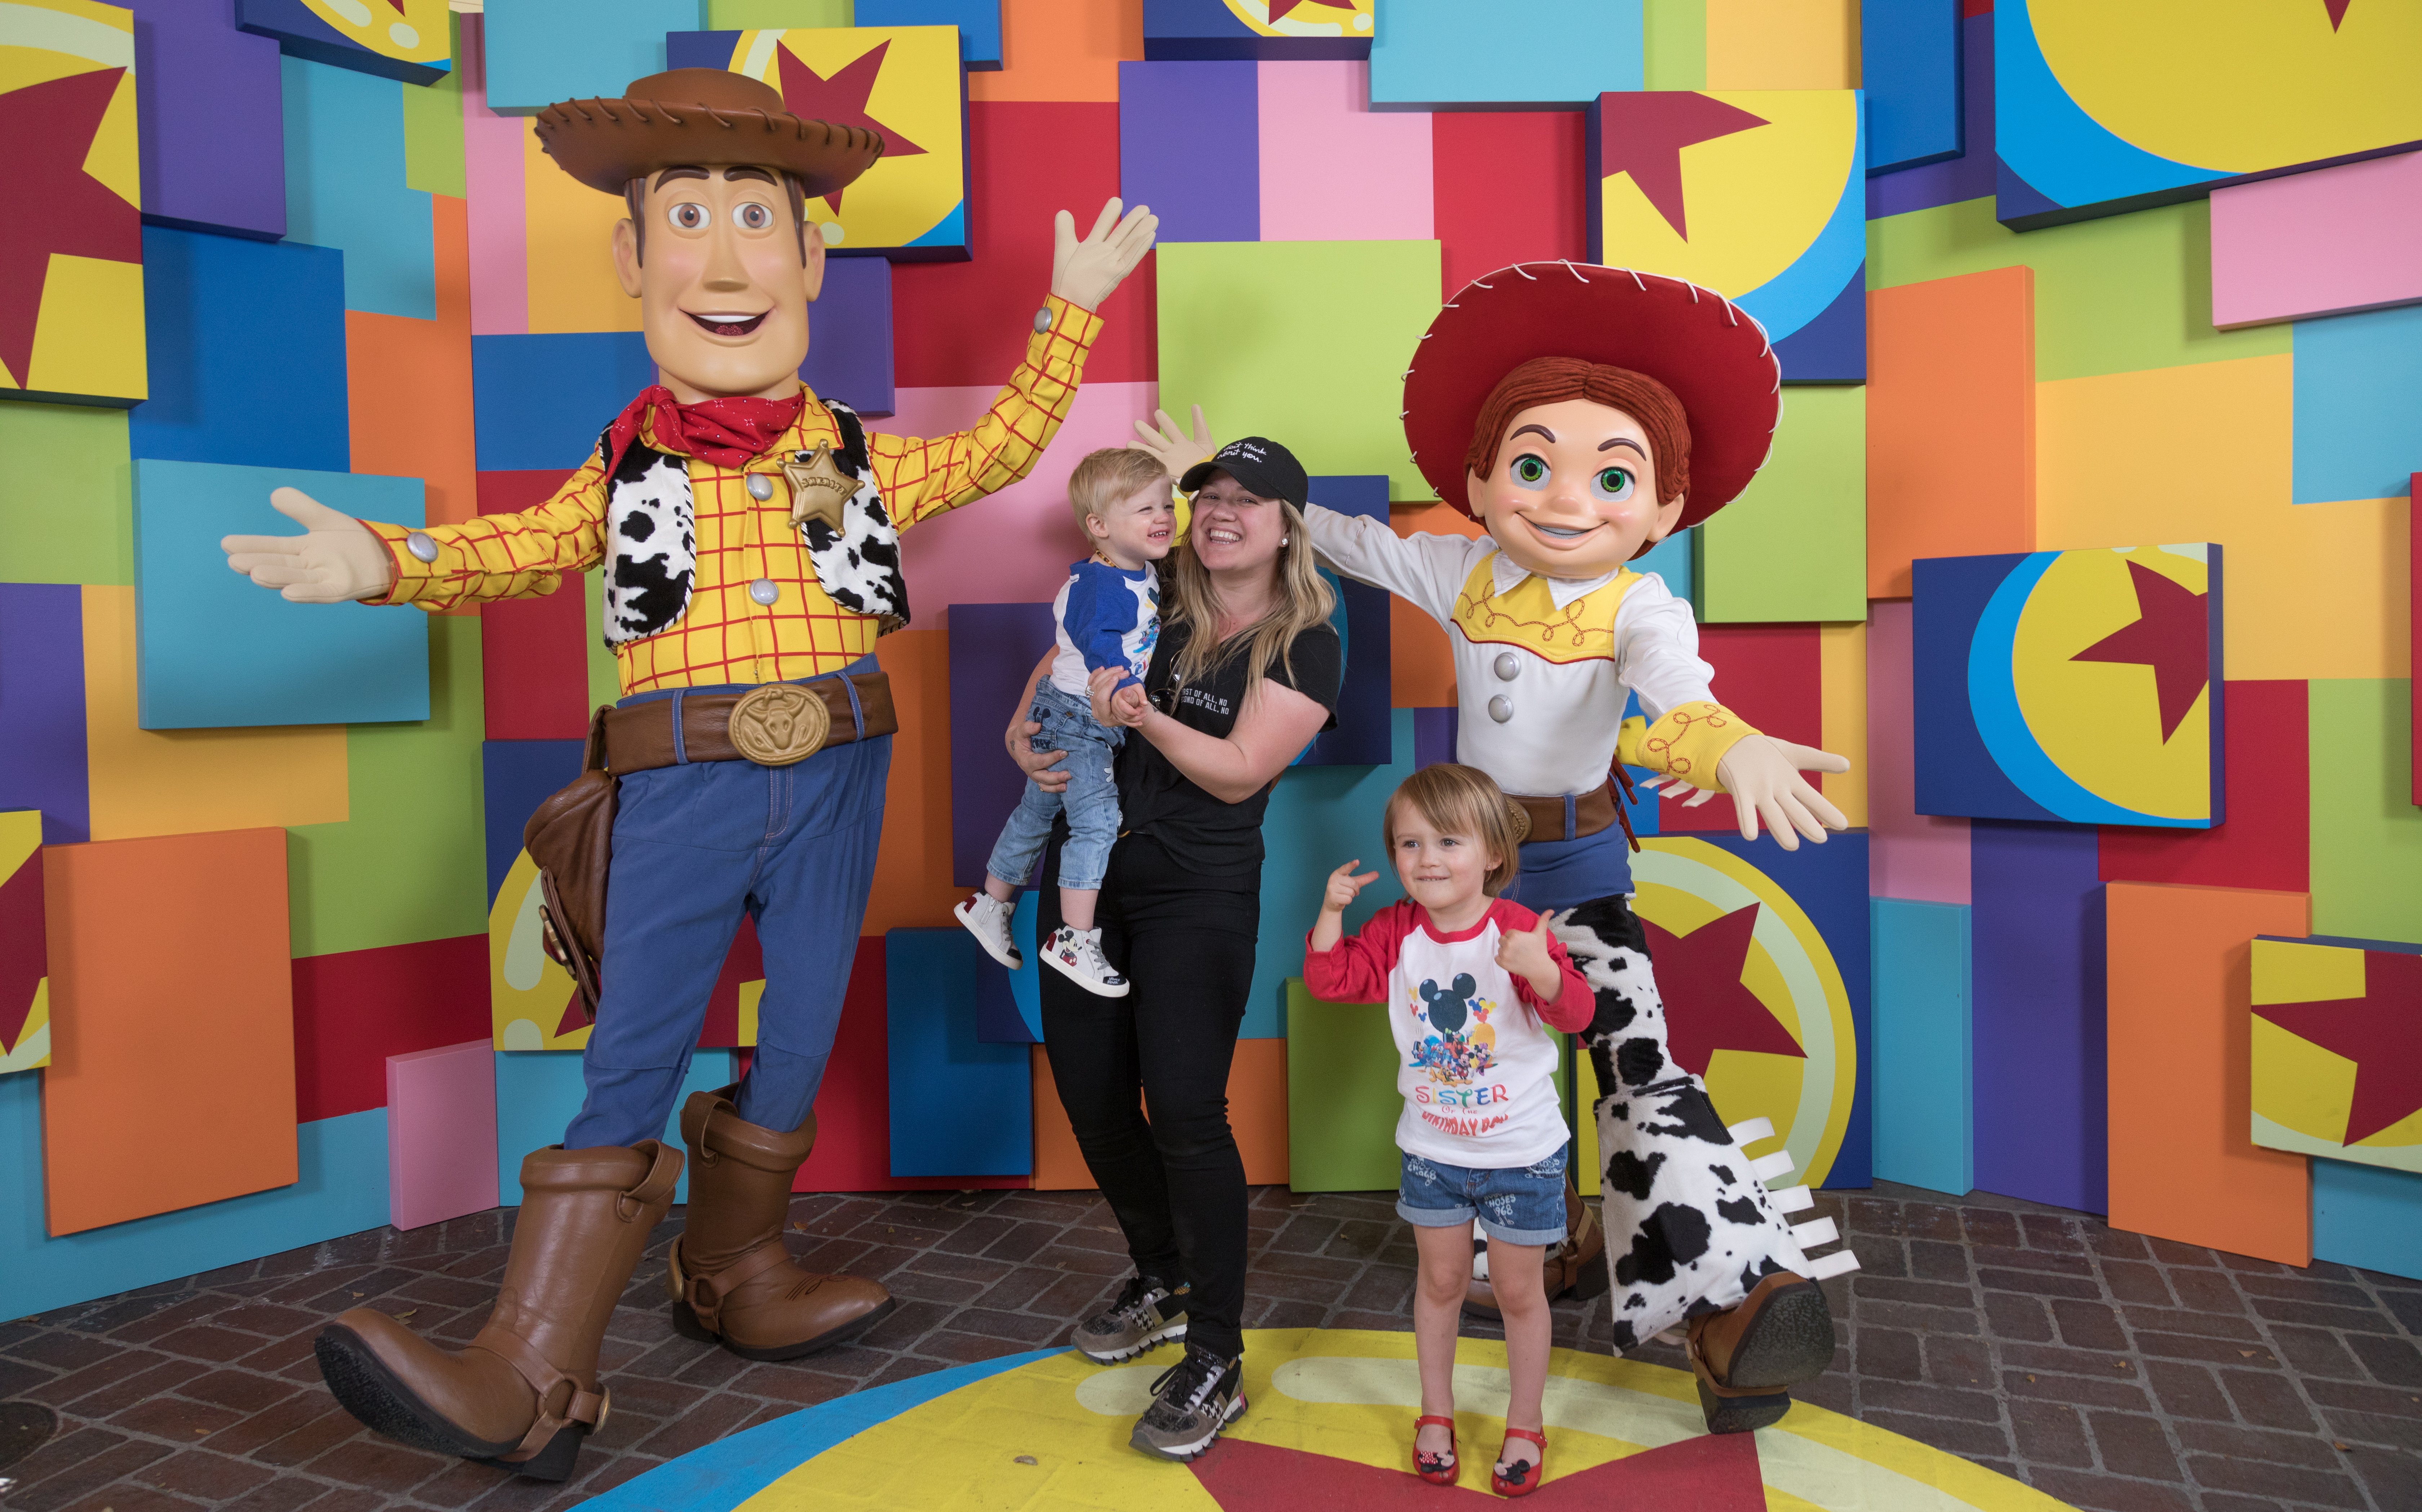 Kelly Clarkson and her children, Remington and River visiting with Woody and Jessie at the launch of Pixar Fest at the Disneyland Resort in Anaheim, California. | Source: Getty Images